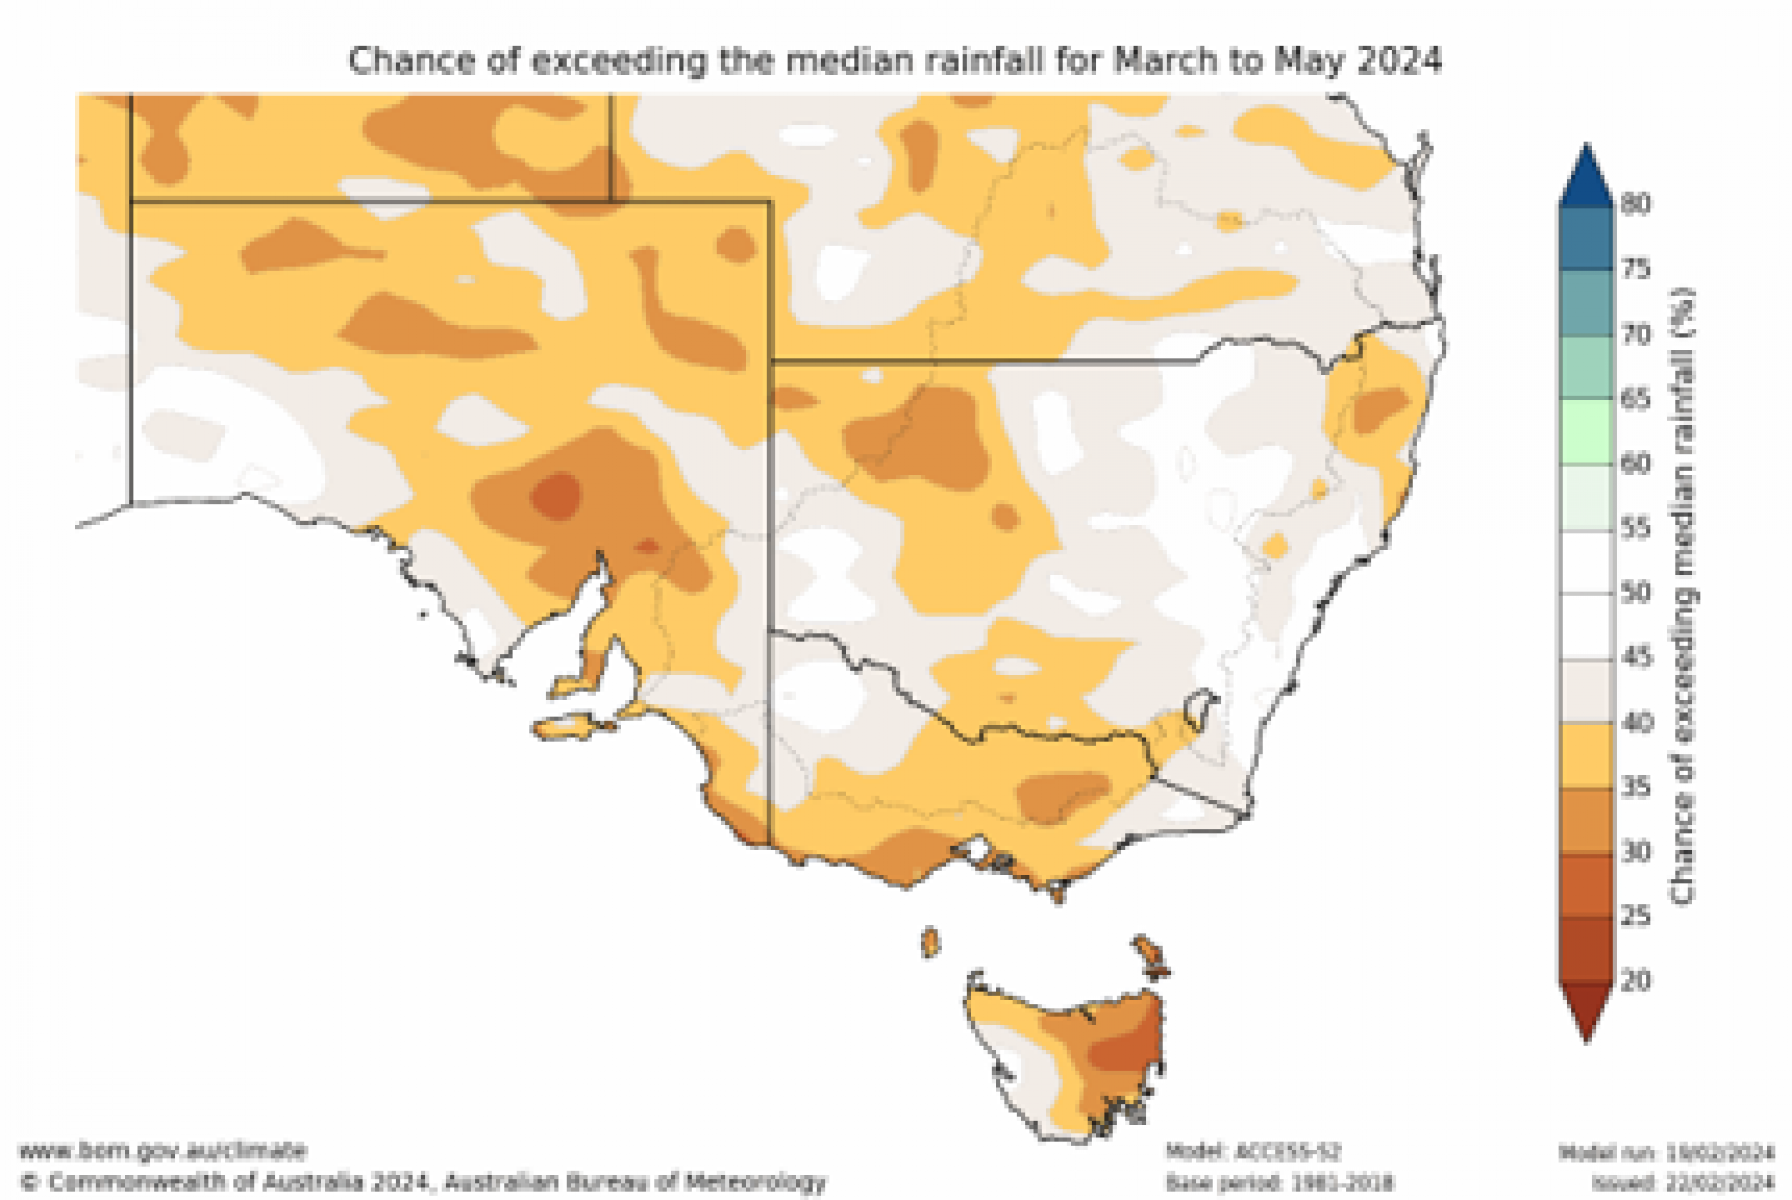 Chance of exceeding median rainfall for March to May 2024